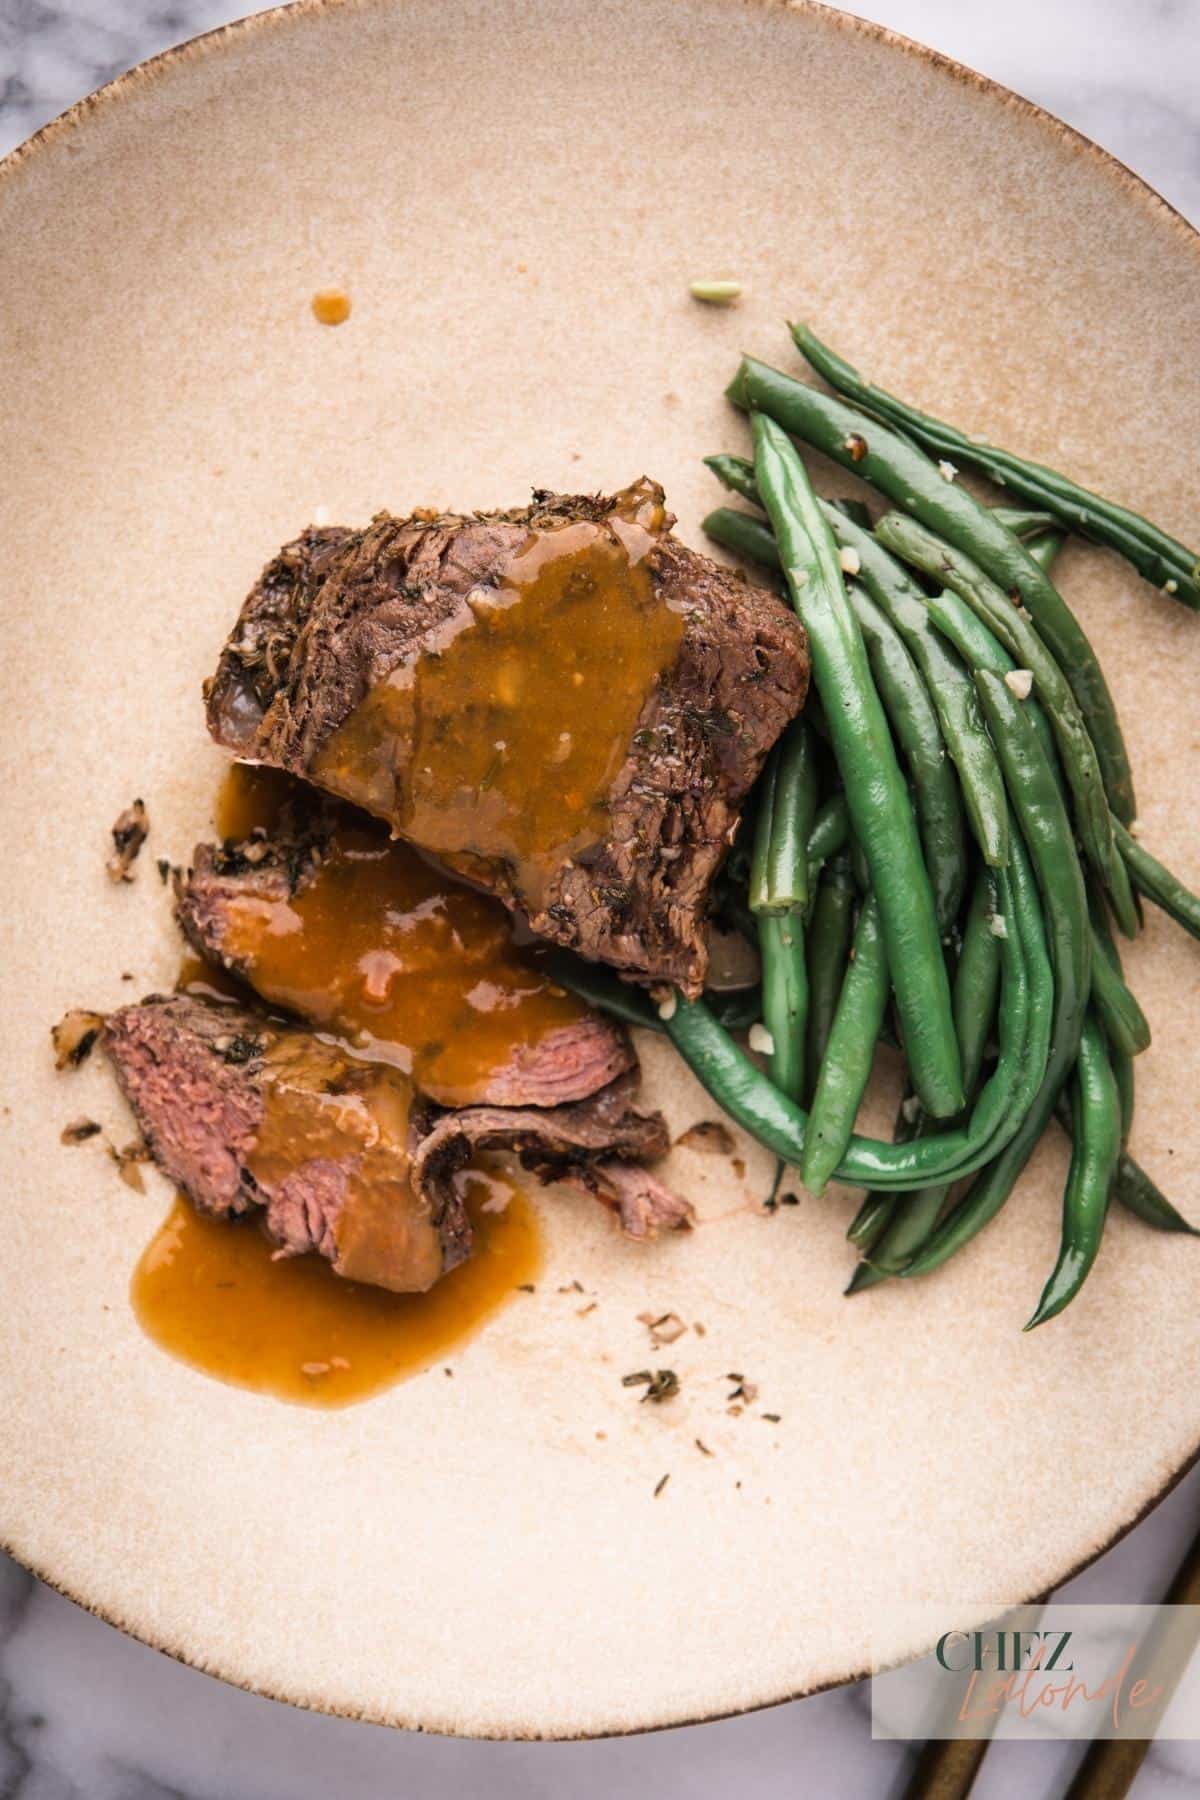 Sous Vide medium rare sous vide filet mignon with gravy and garlic green beans on a round plate